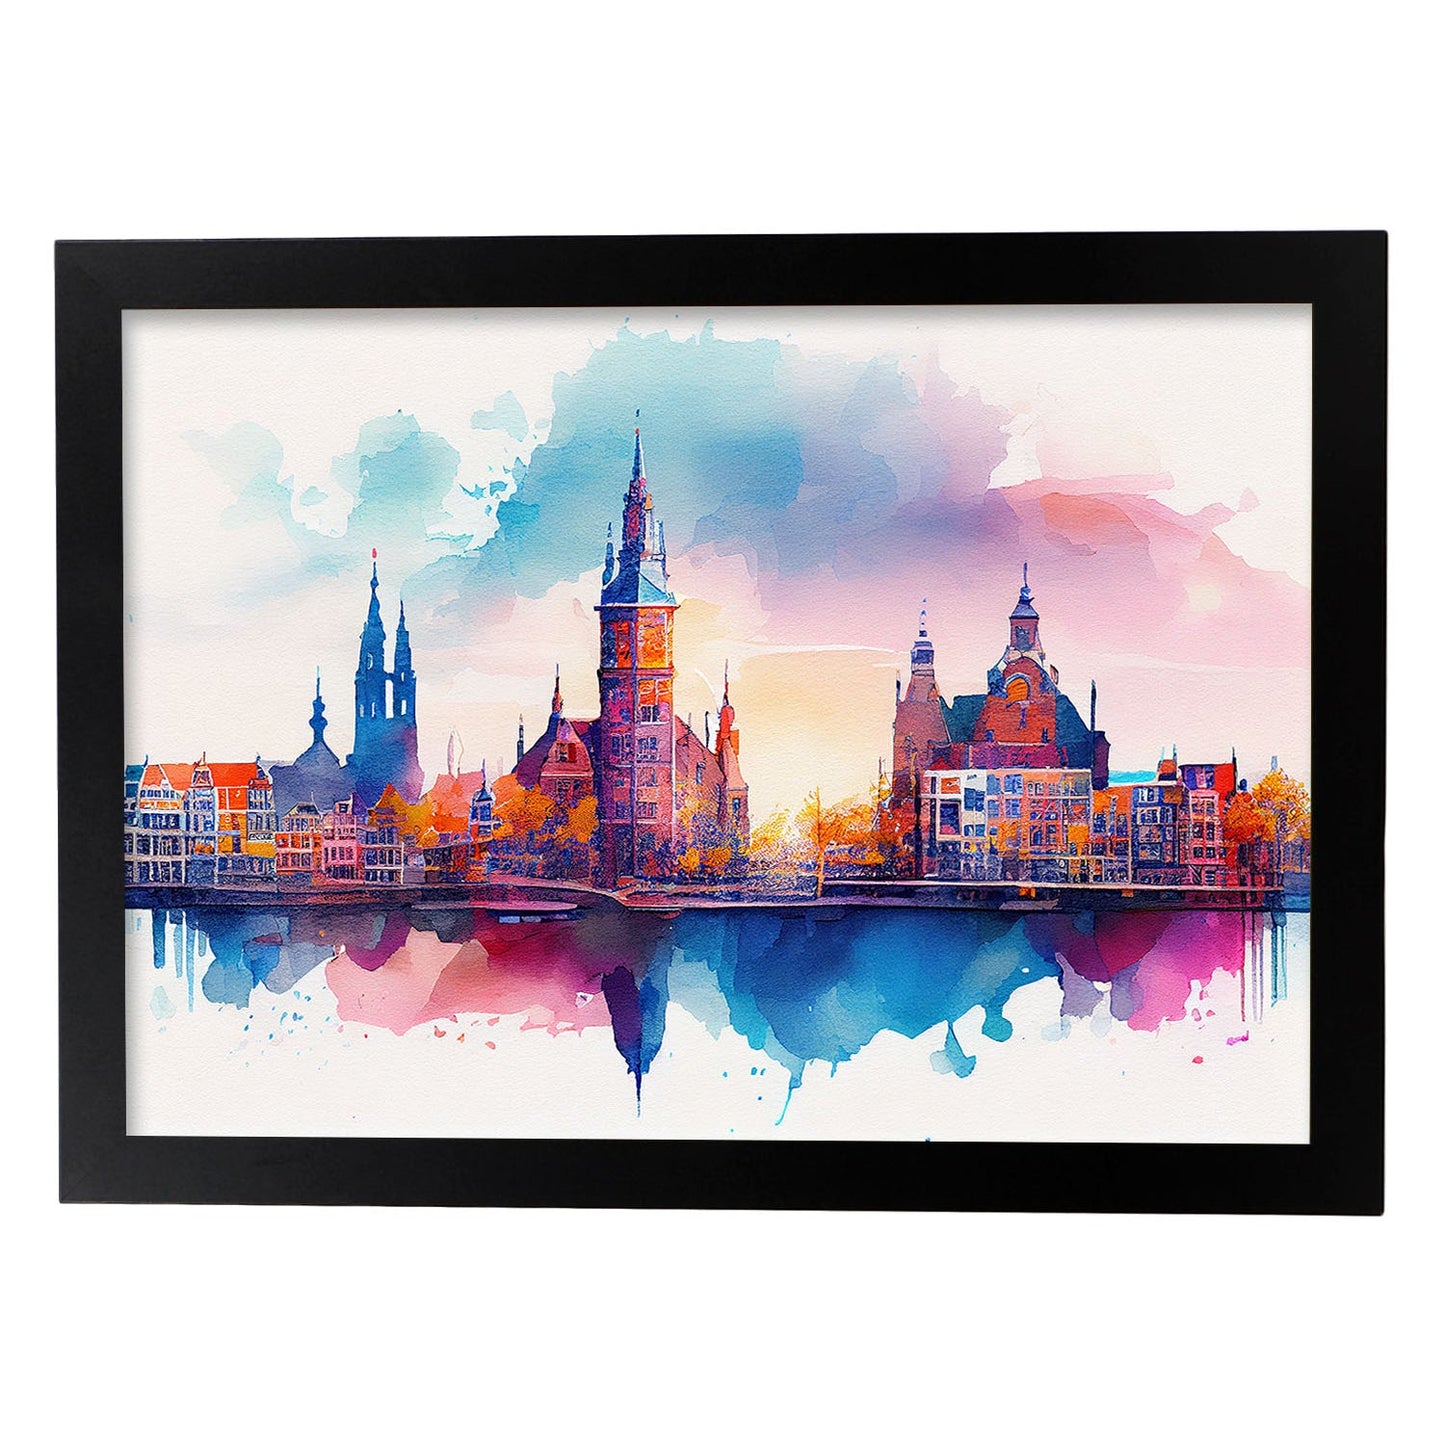 Nacnic watercolor of a skyline of the city of Amsterdam_3. Aesthetic Wall Art Prints for Bedroom or Living Room Design.